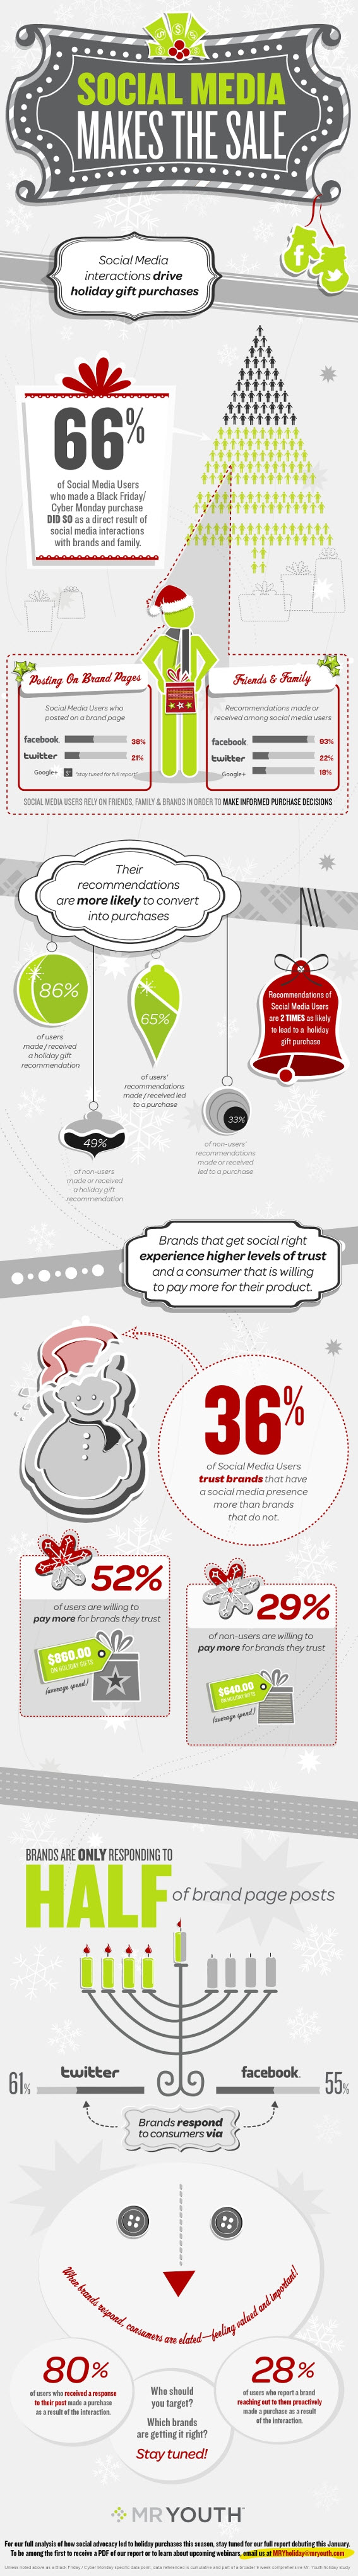 Social-Media-Makes-The-Sale-infographic